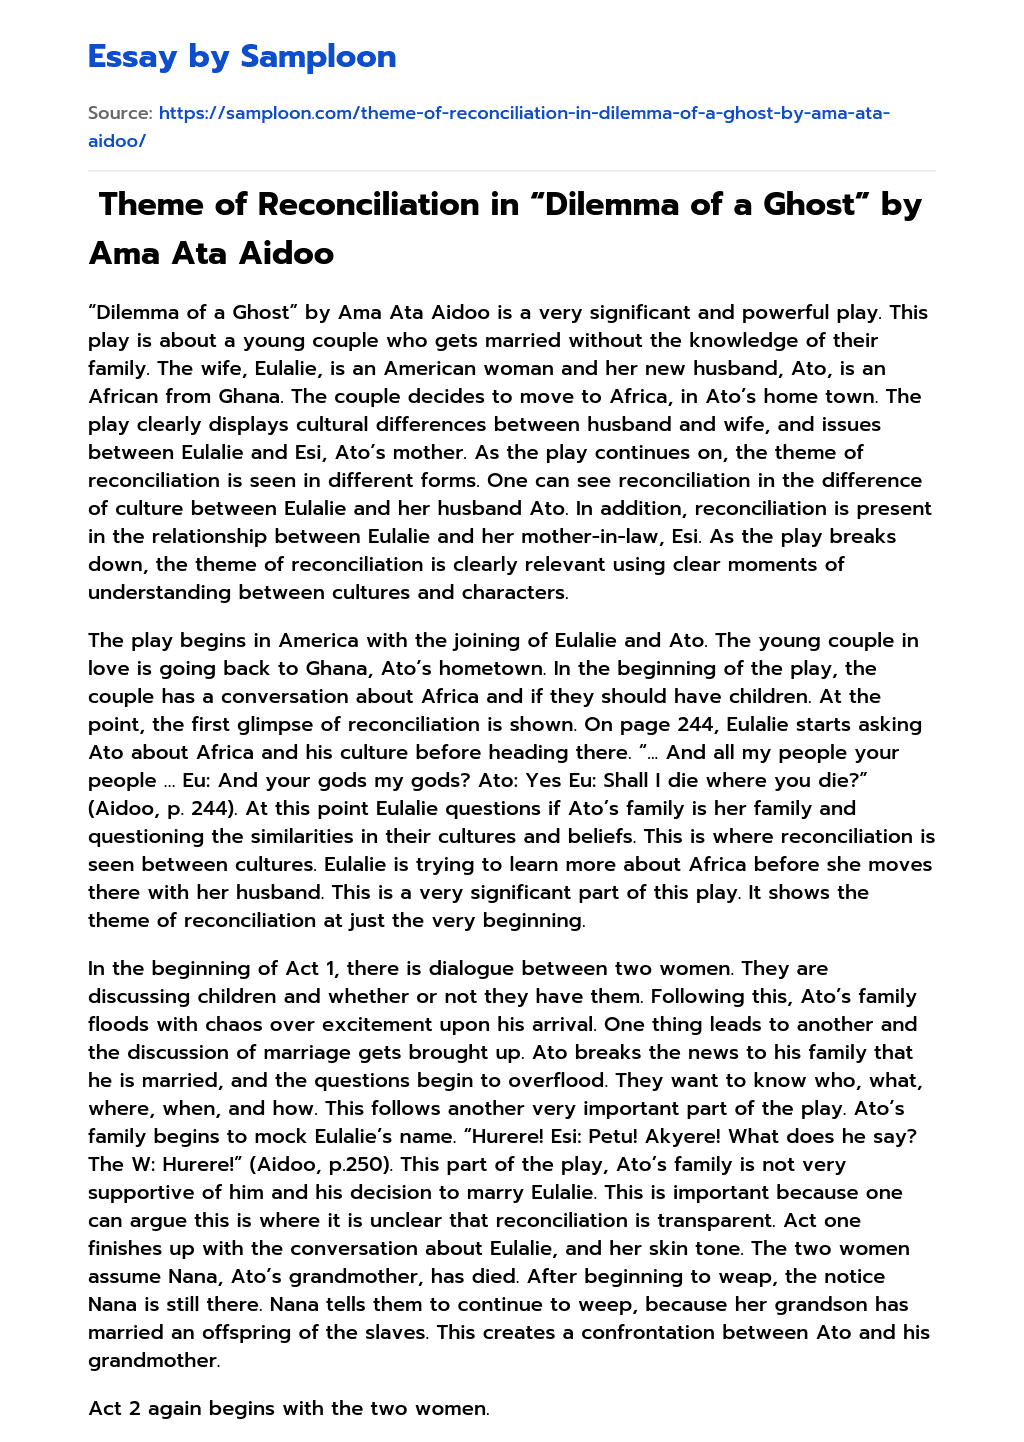 Theme of Reconciliation in “Dilemma of a Ghost” by Ama Ata Aidoo Analytical Essay essay